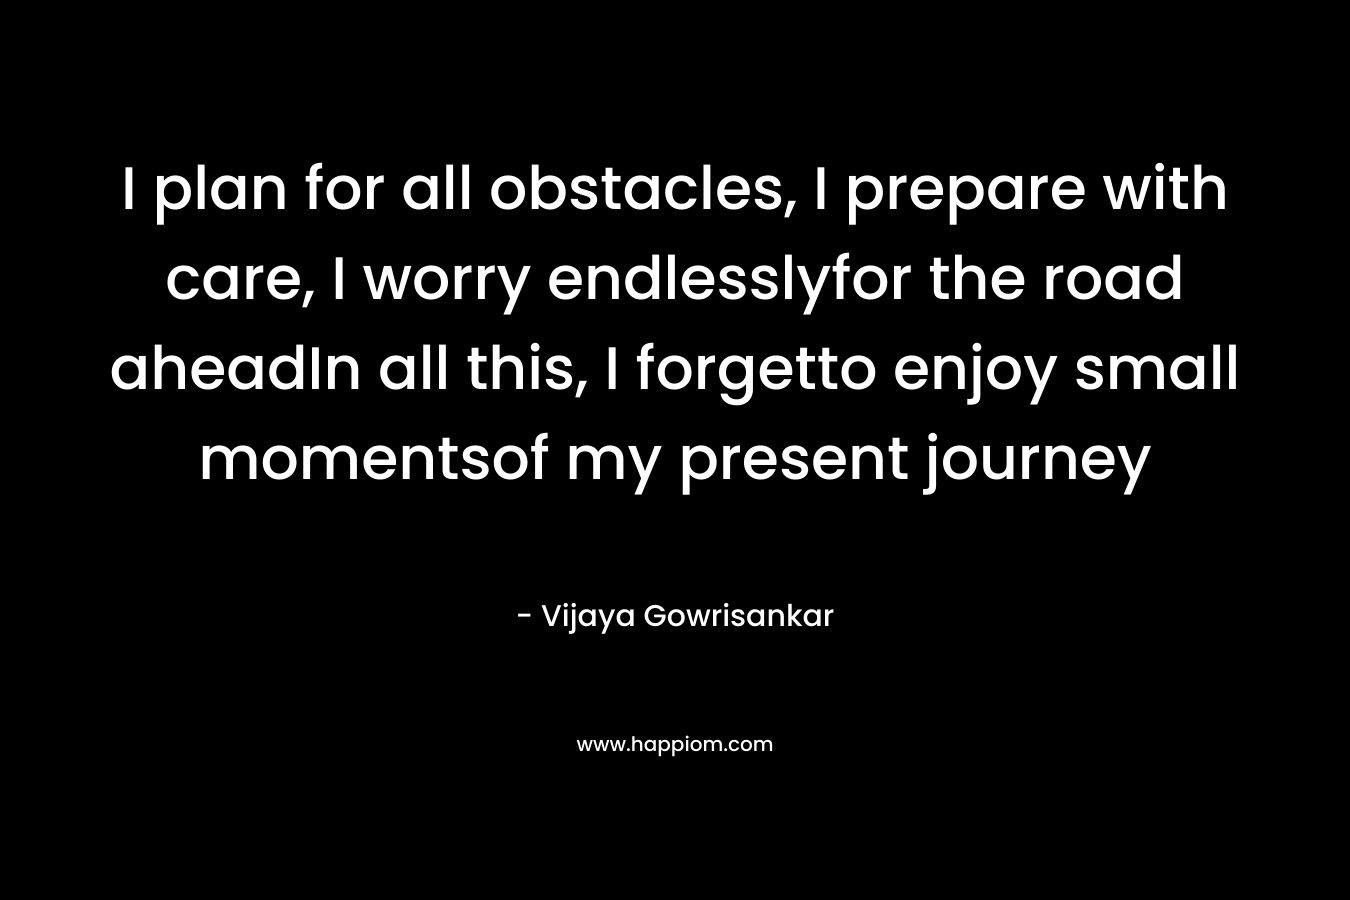 I plan for all obstacles, I prepare with care, I worry endlesslyfor the road aheadIn all this, I forgetto enjoy small momentsof my present journey – Vijaya Gowrisankar